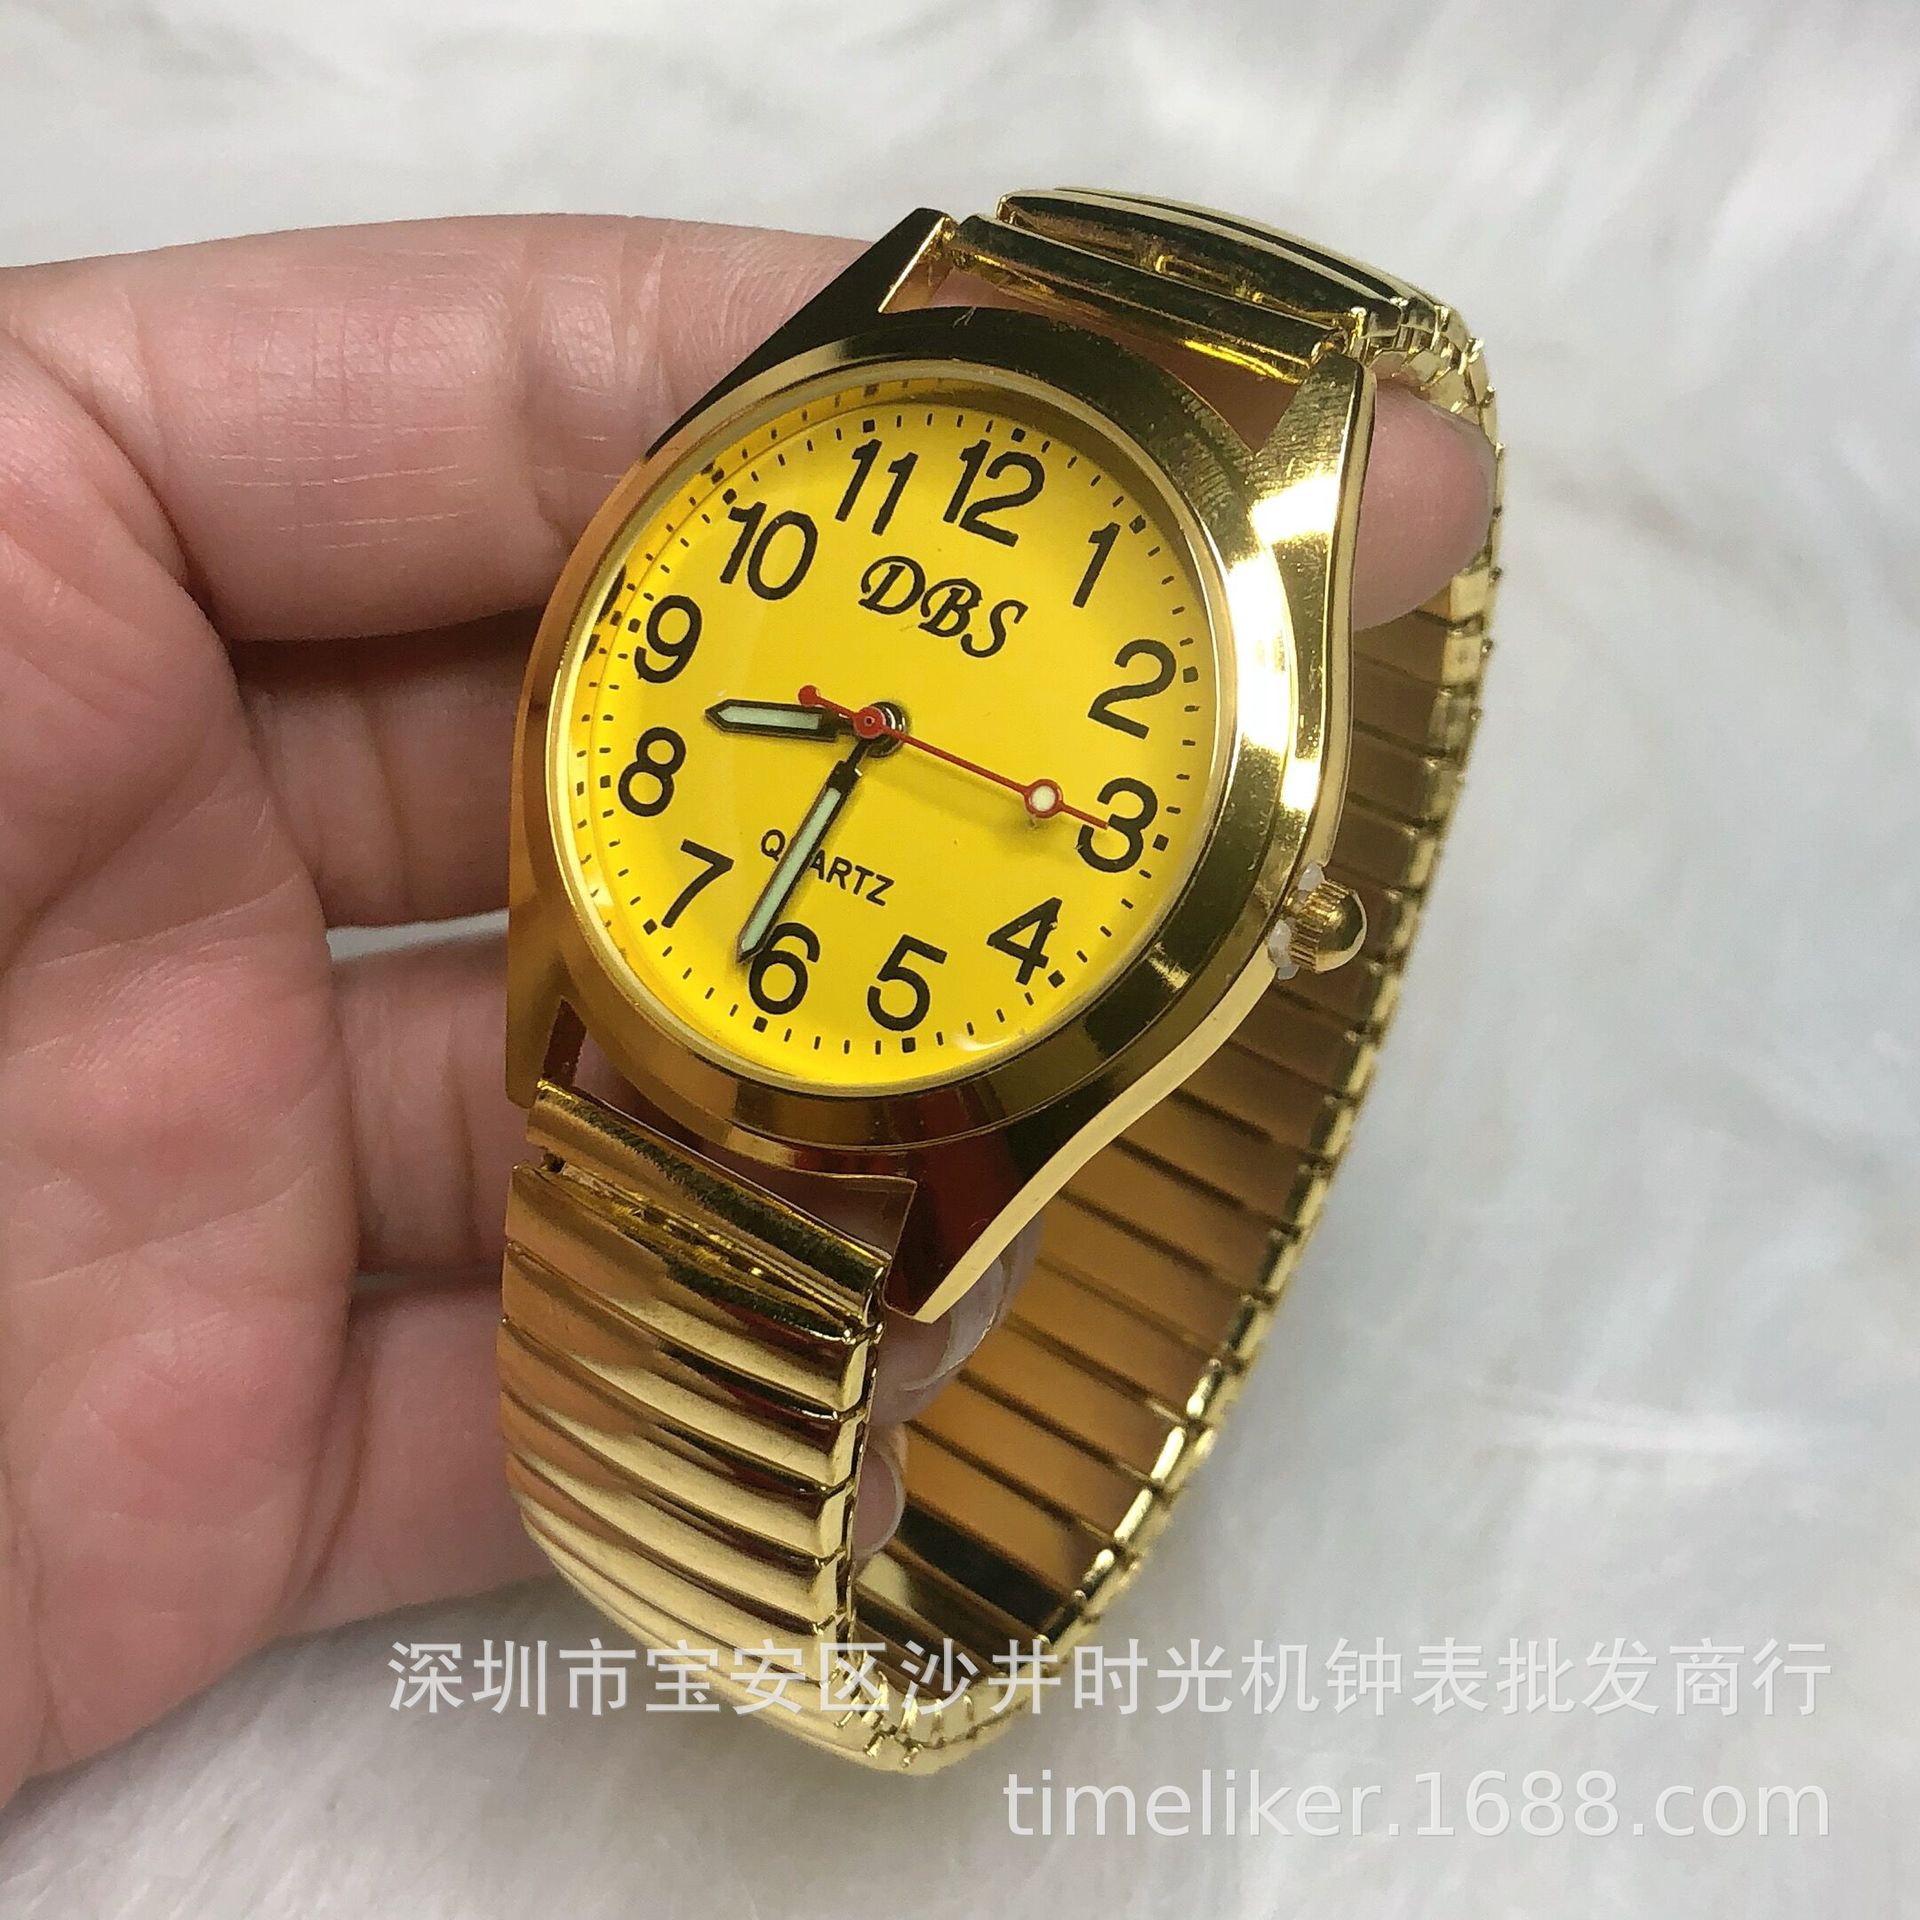 Waterproof Digital Face Large Dial Elastic Band Watch for the Elderly Wholesale Couple Watches Men's and Women's Quartz Watch in Stock